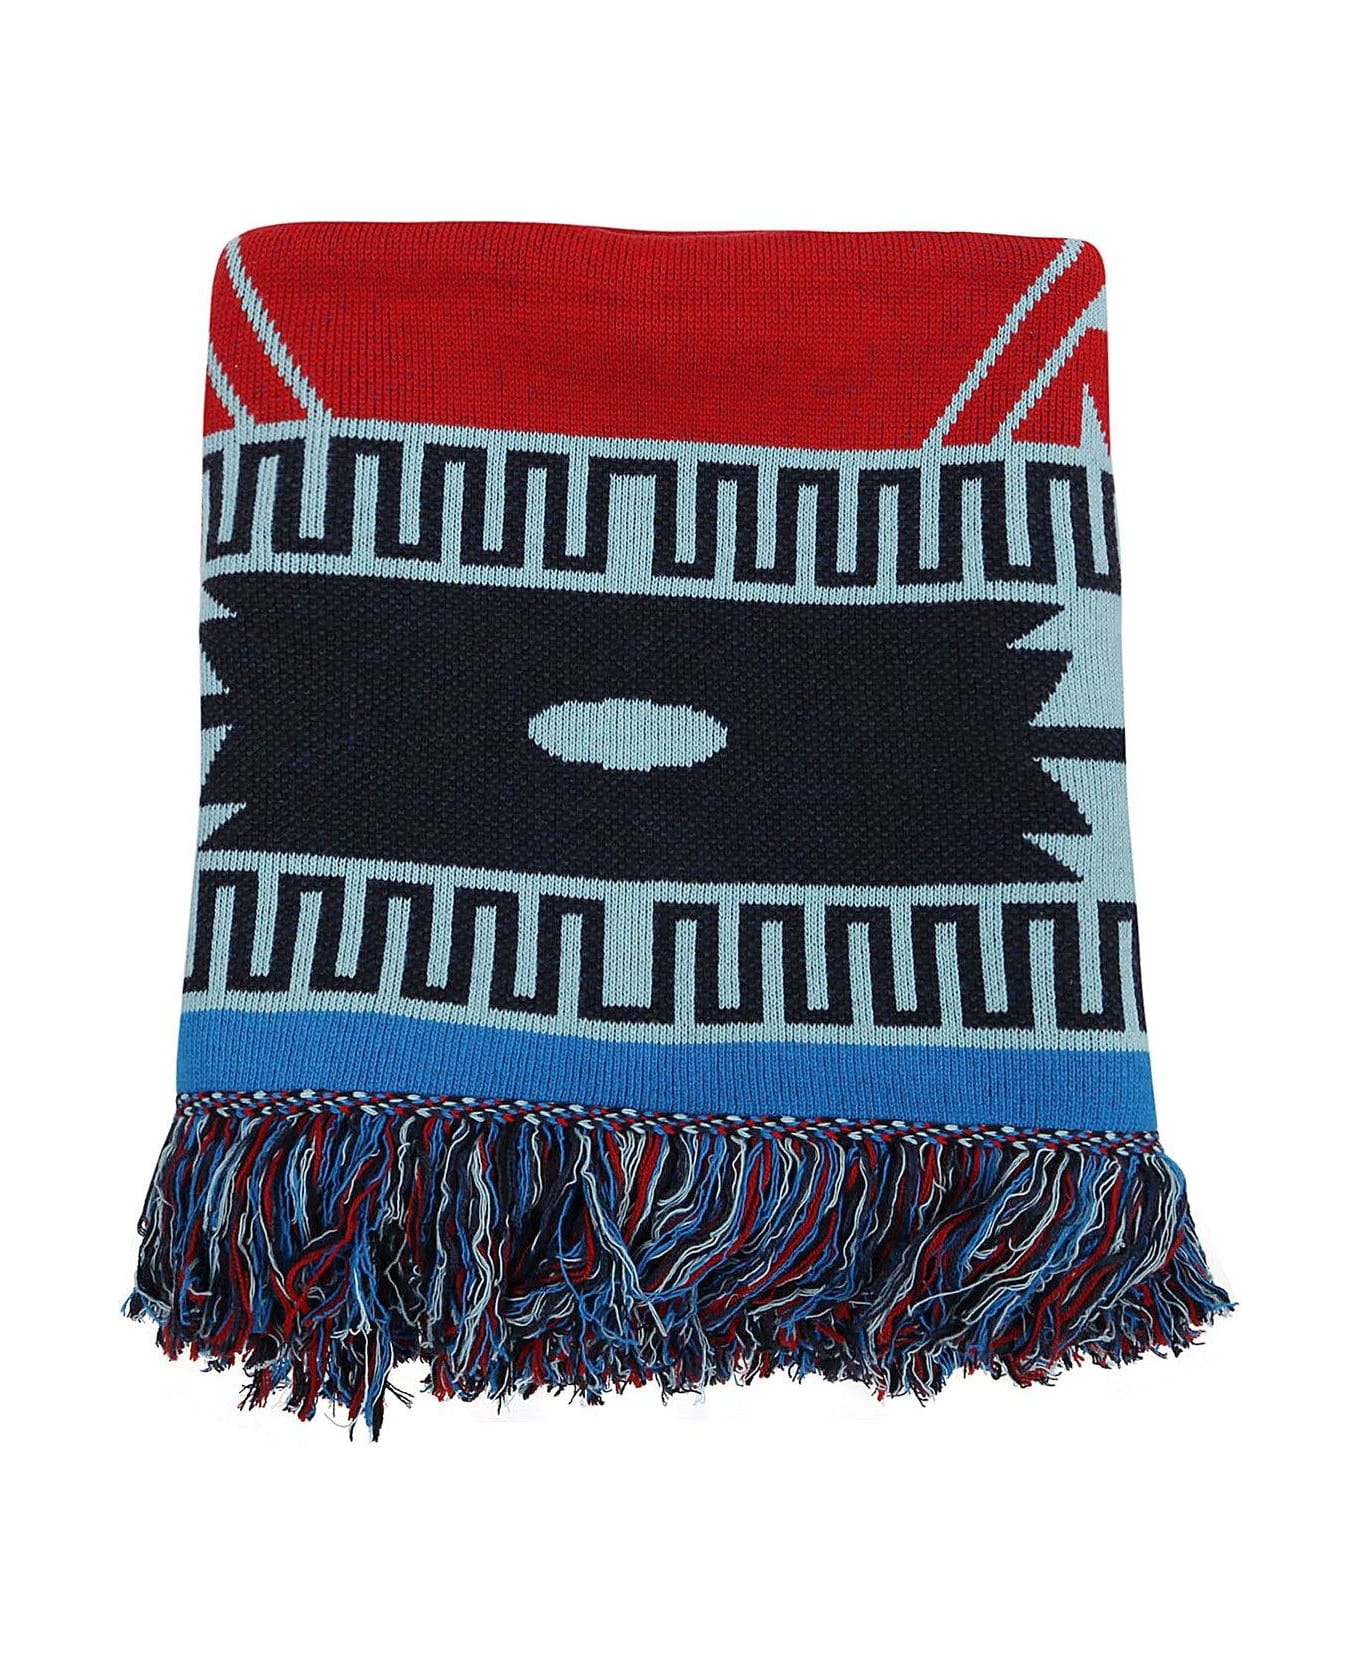 Alanui Intarsia-knitted Fringed Blanket - RED/BLUE